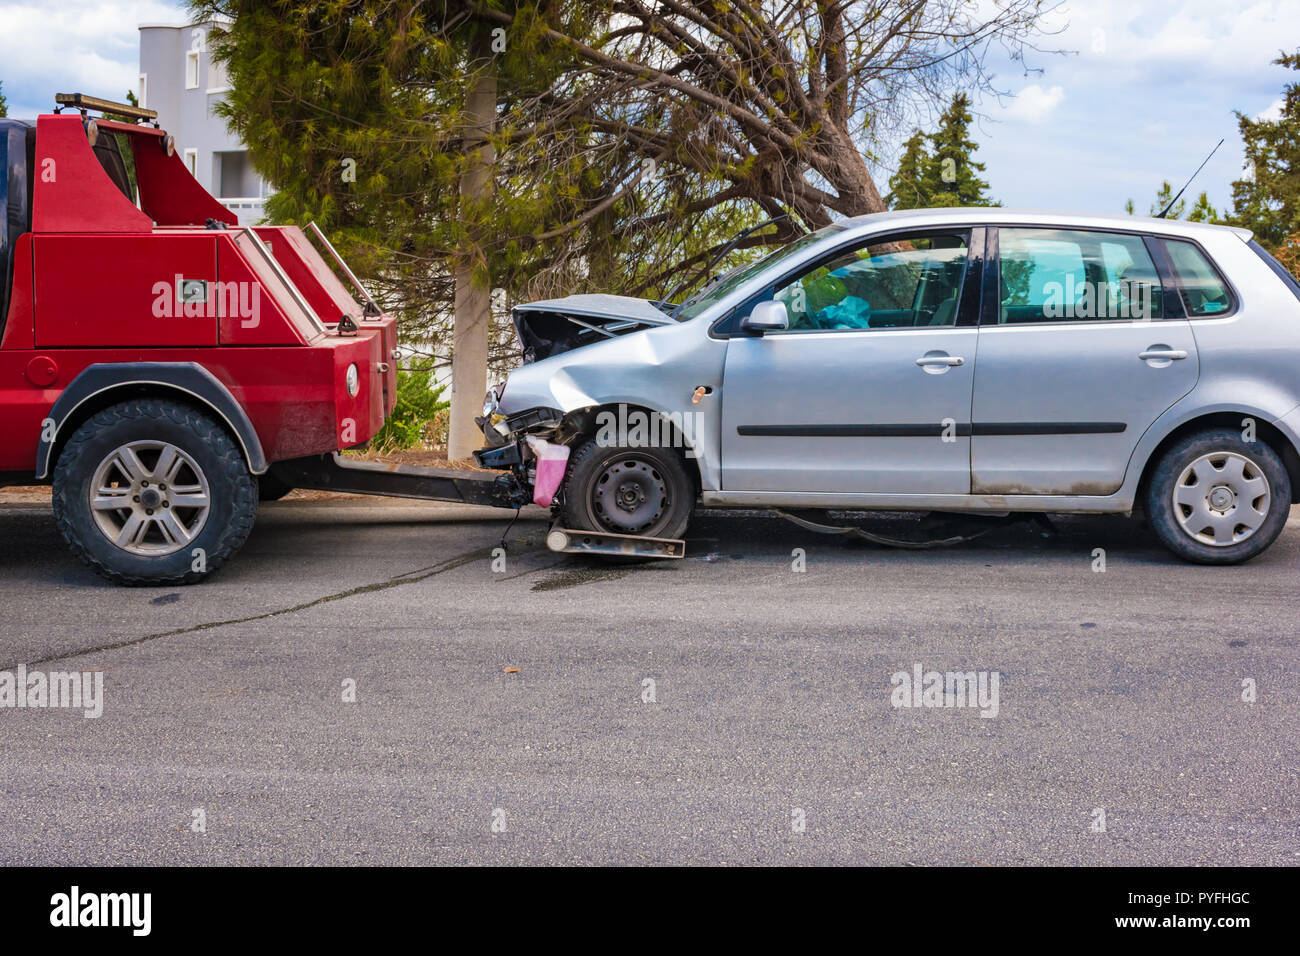 Crashed car after accident ready to be tow away by tow truck Stock Photo